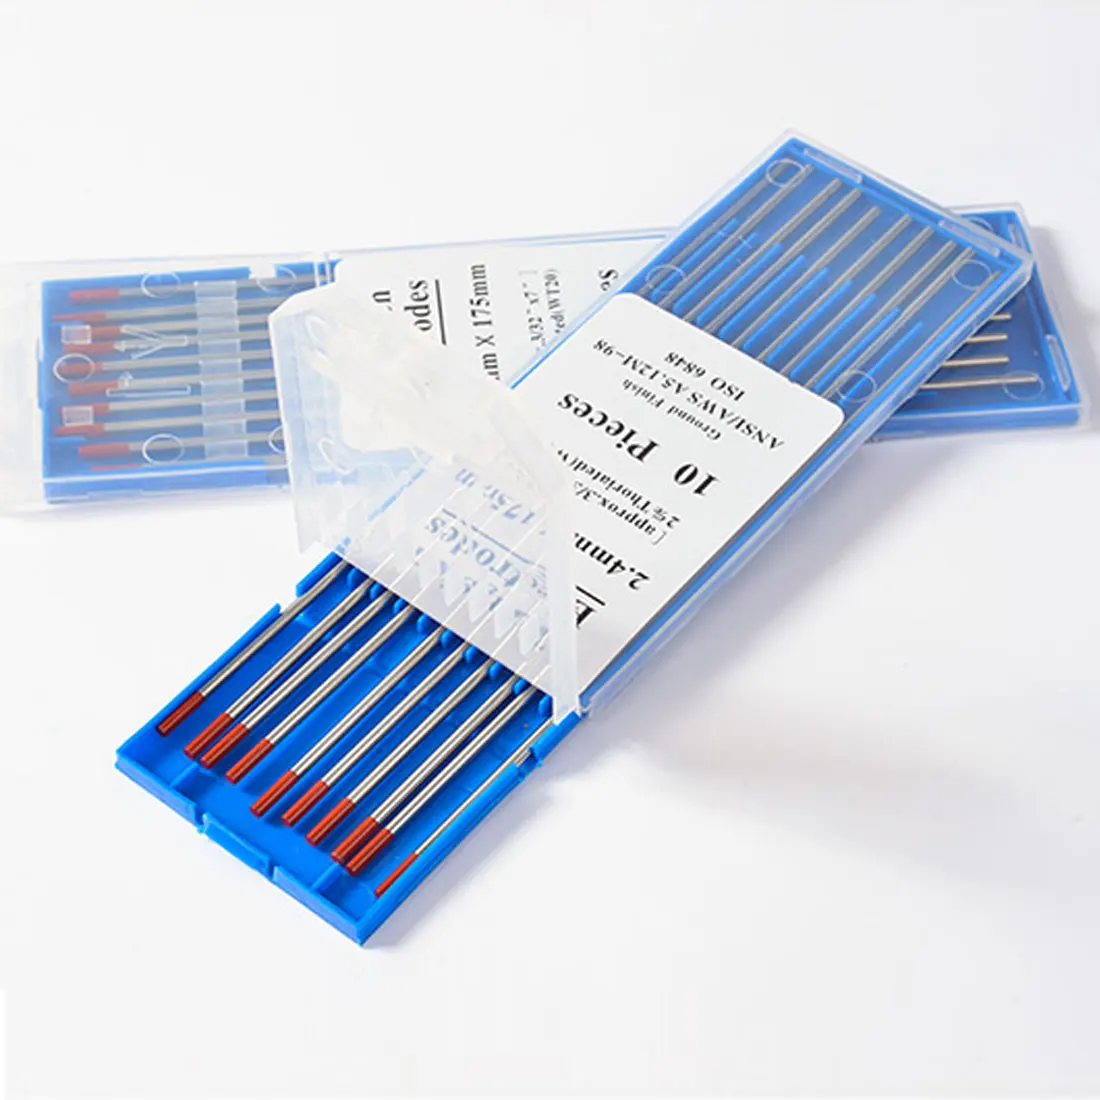 

Welding Electrodes Tig Rods Professional Tungsten Electrodes Diameter 150mm x 1.6mm/ 2.0mm/ 2.4mm/ 3.2mm 10pcs with Case